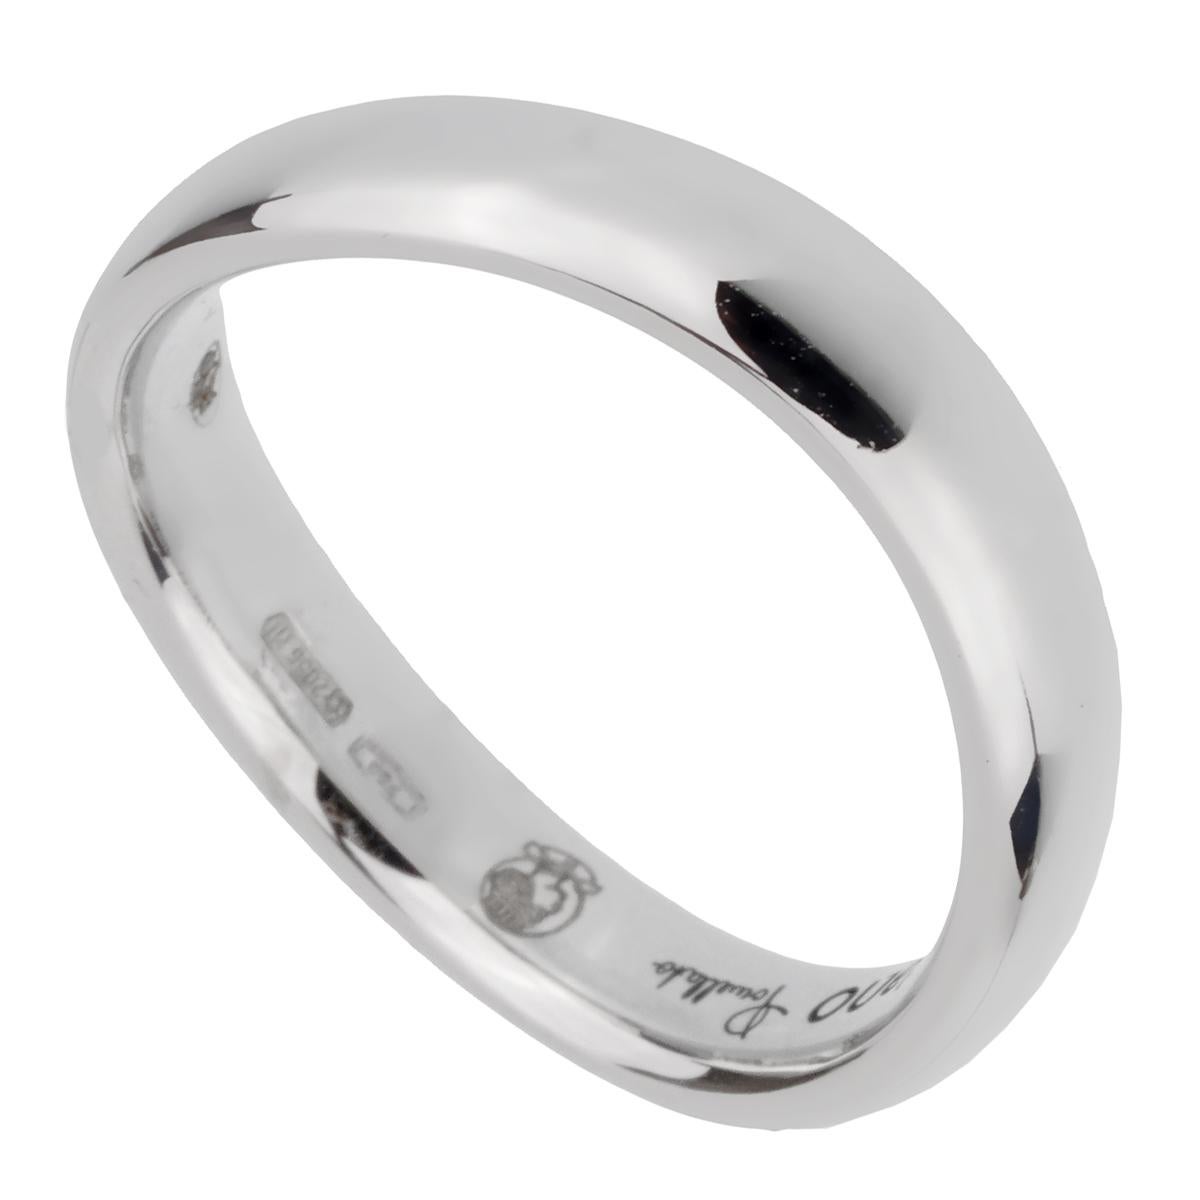 A chic Pomellato wave style band crafted in 18k white gold, the ring measures a size 5.25 and can be resized.

Pomellato Retail Price: $1350
Sku: 2403